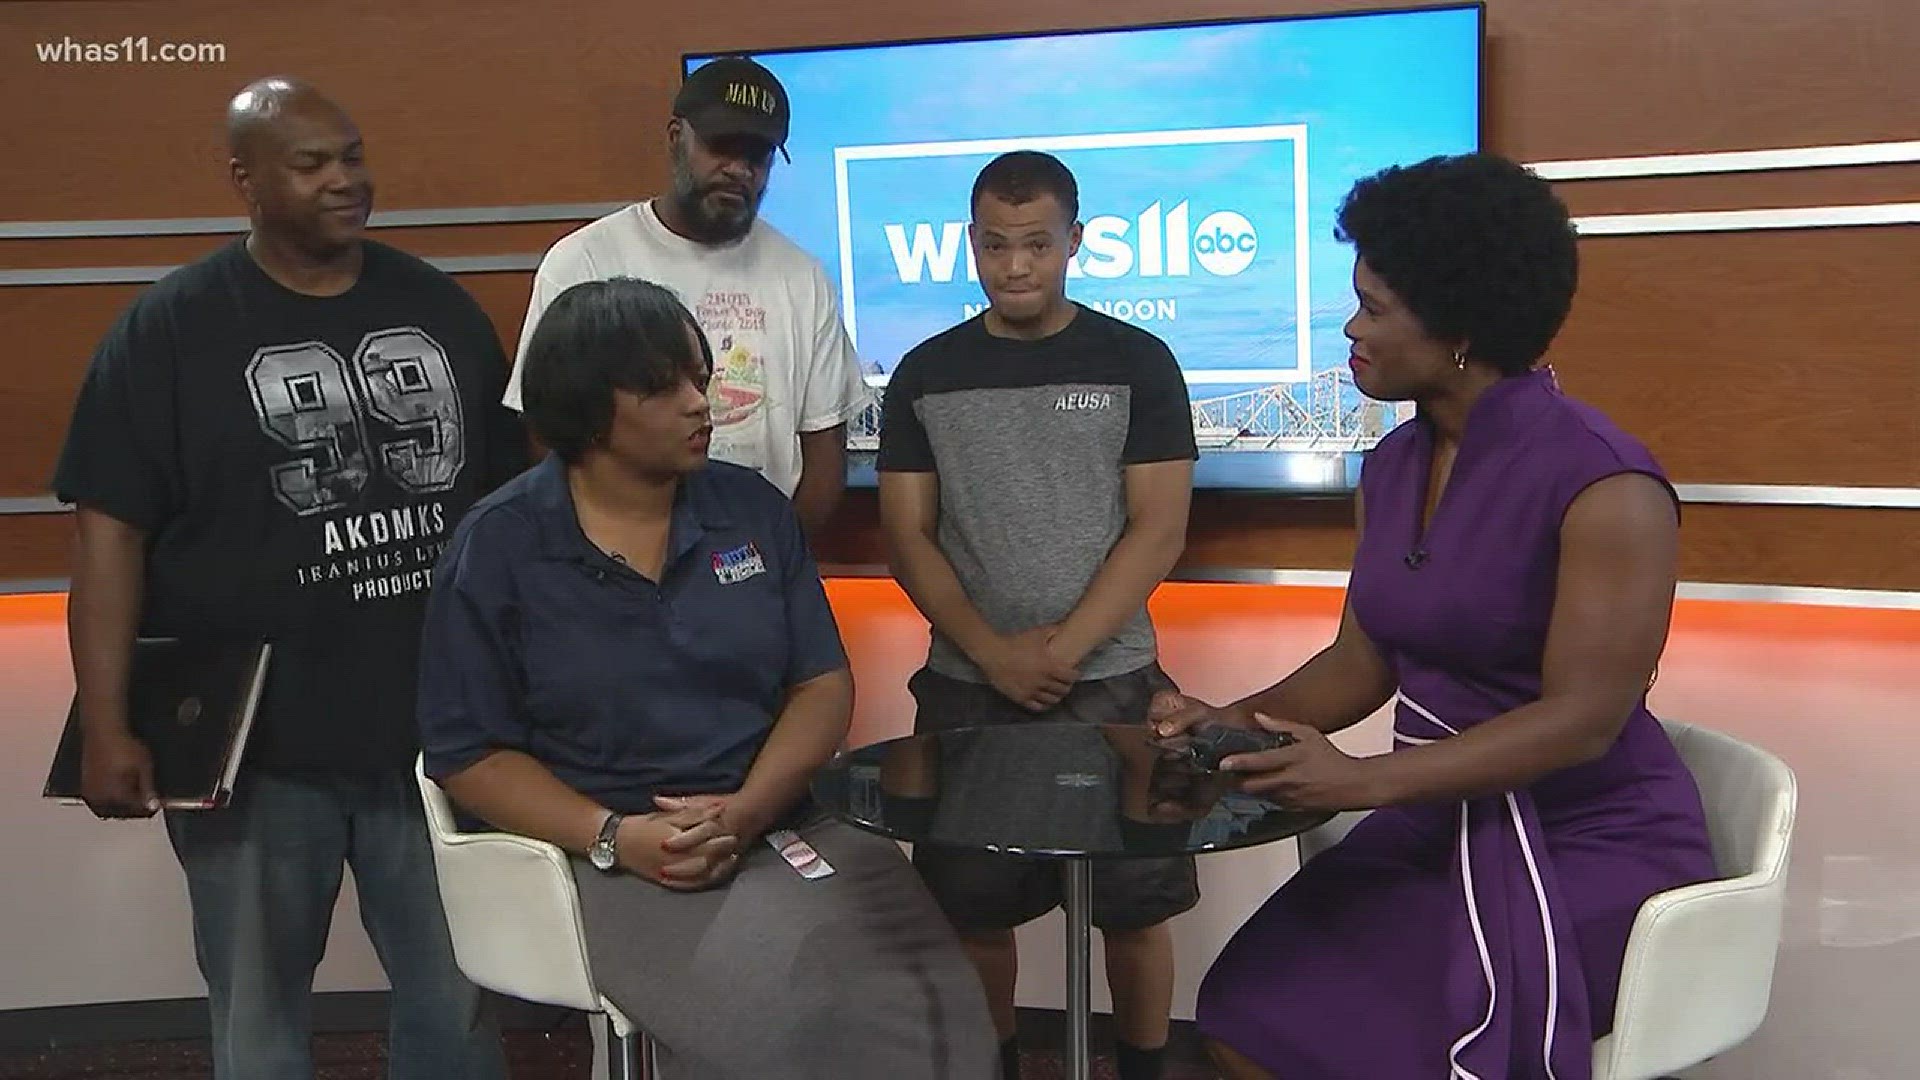 Man Up hosts event that promotes fatherhood and families.